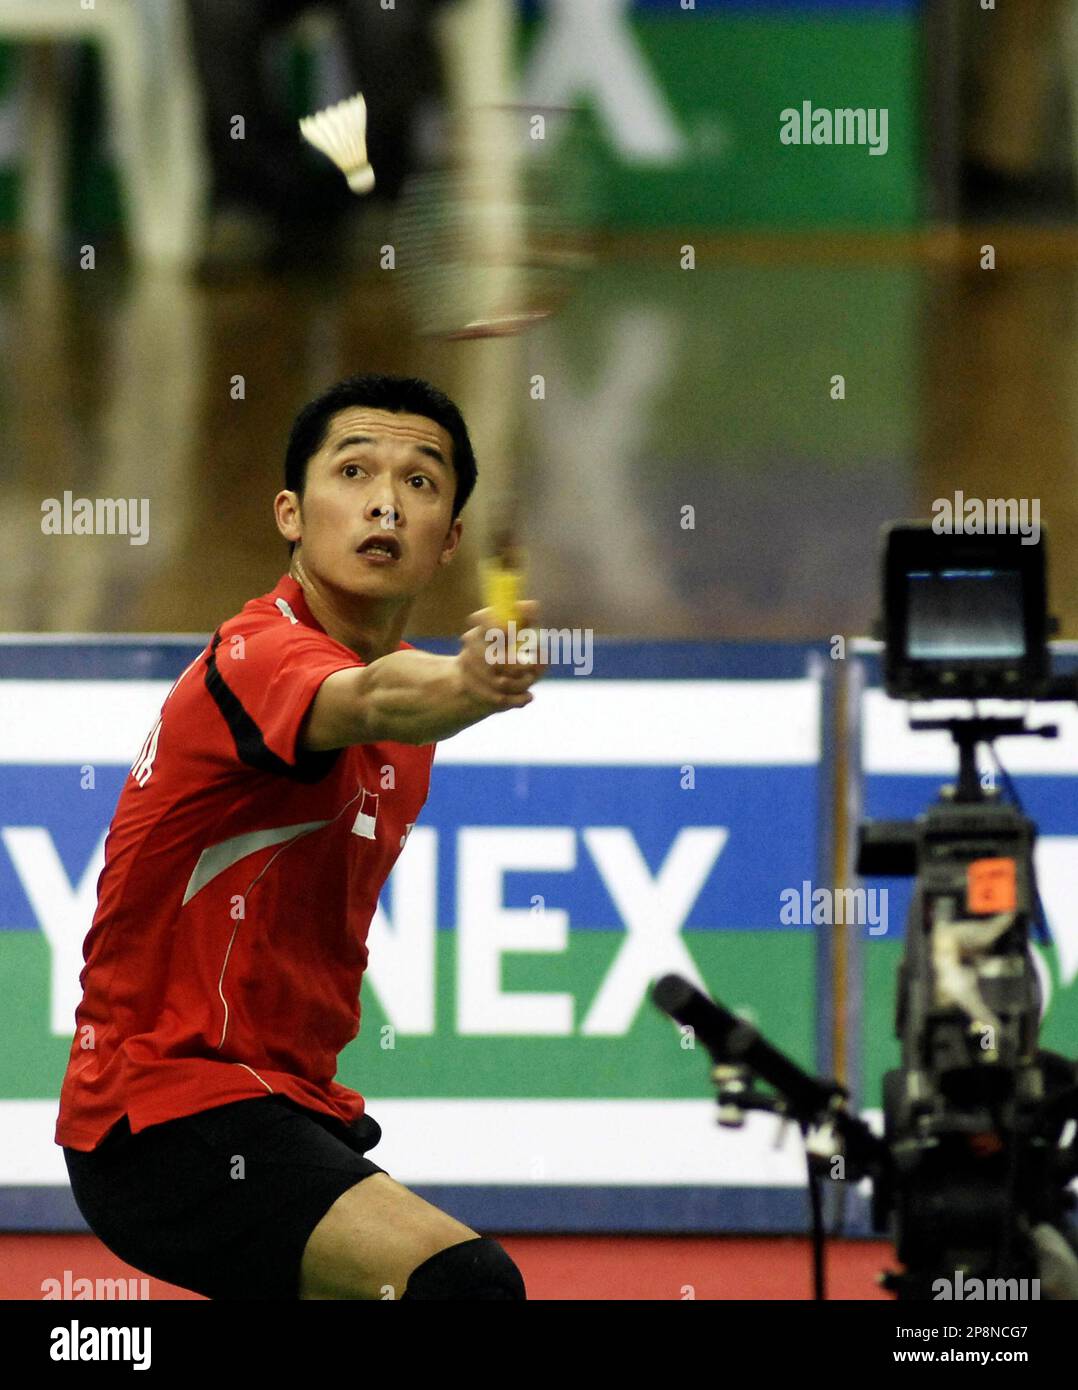 Indonesian badminton player Taufik Hidayat plays a shot against fellow Indonesian Tommy Sugiarto in the mens single semifinal of the Yonex Sunrise India Open 2009 in Hyderabad, India, Saturday, March 28, 2009.